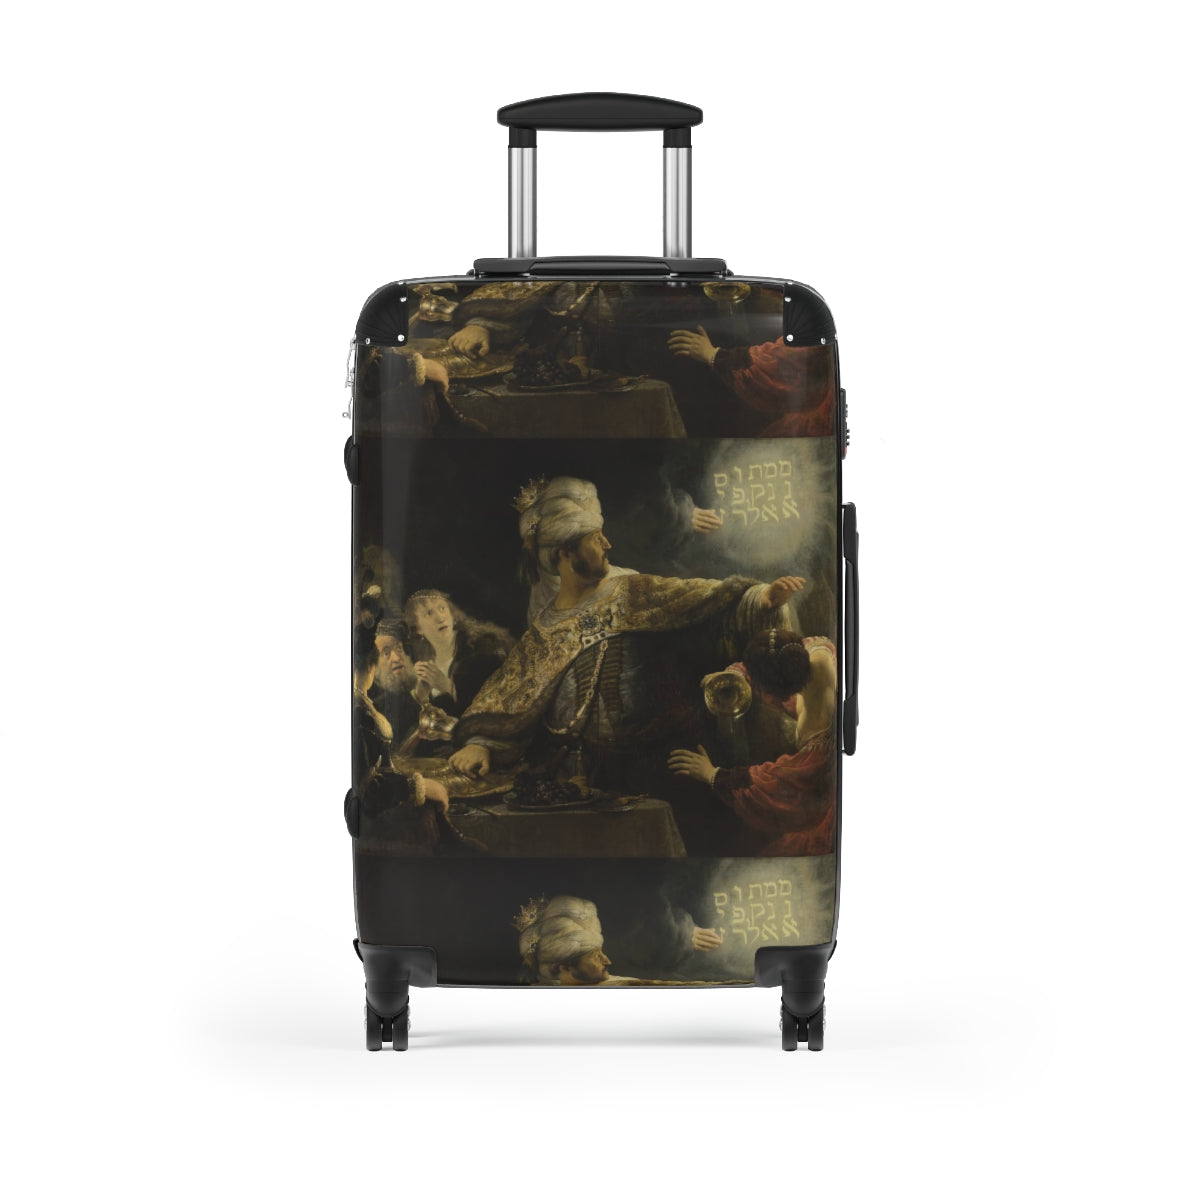 Getrott Belshazzars Feast by Rembrandt Black Cabin Suitcase Extended Storage Adjustable Telescopic Handle Double wheeled Polycarbonate Hard-shell Built-in Lock-Bags-Geotrott